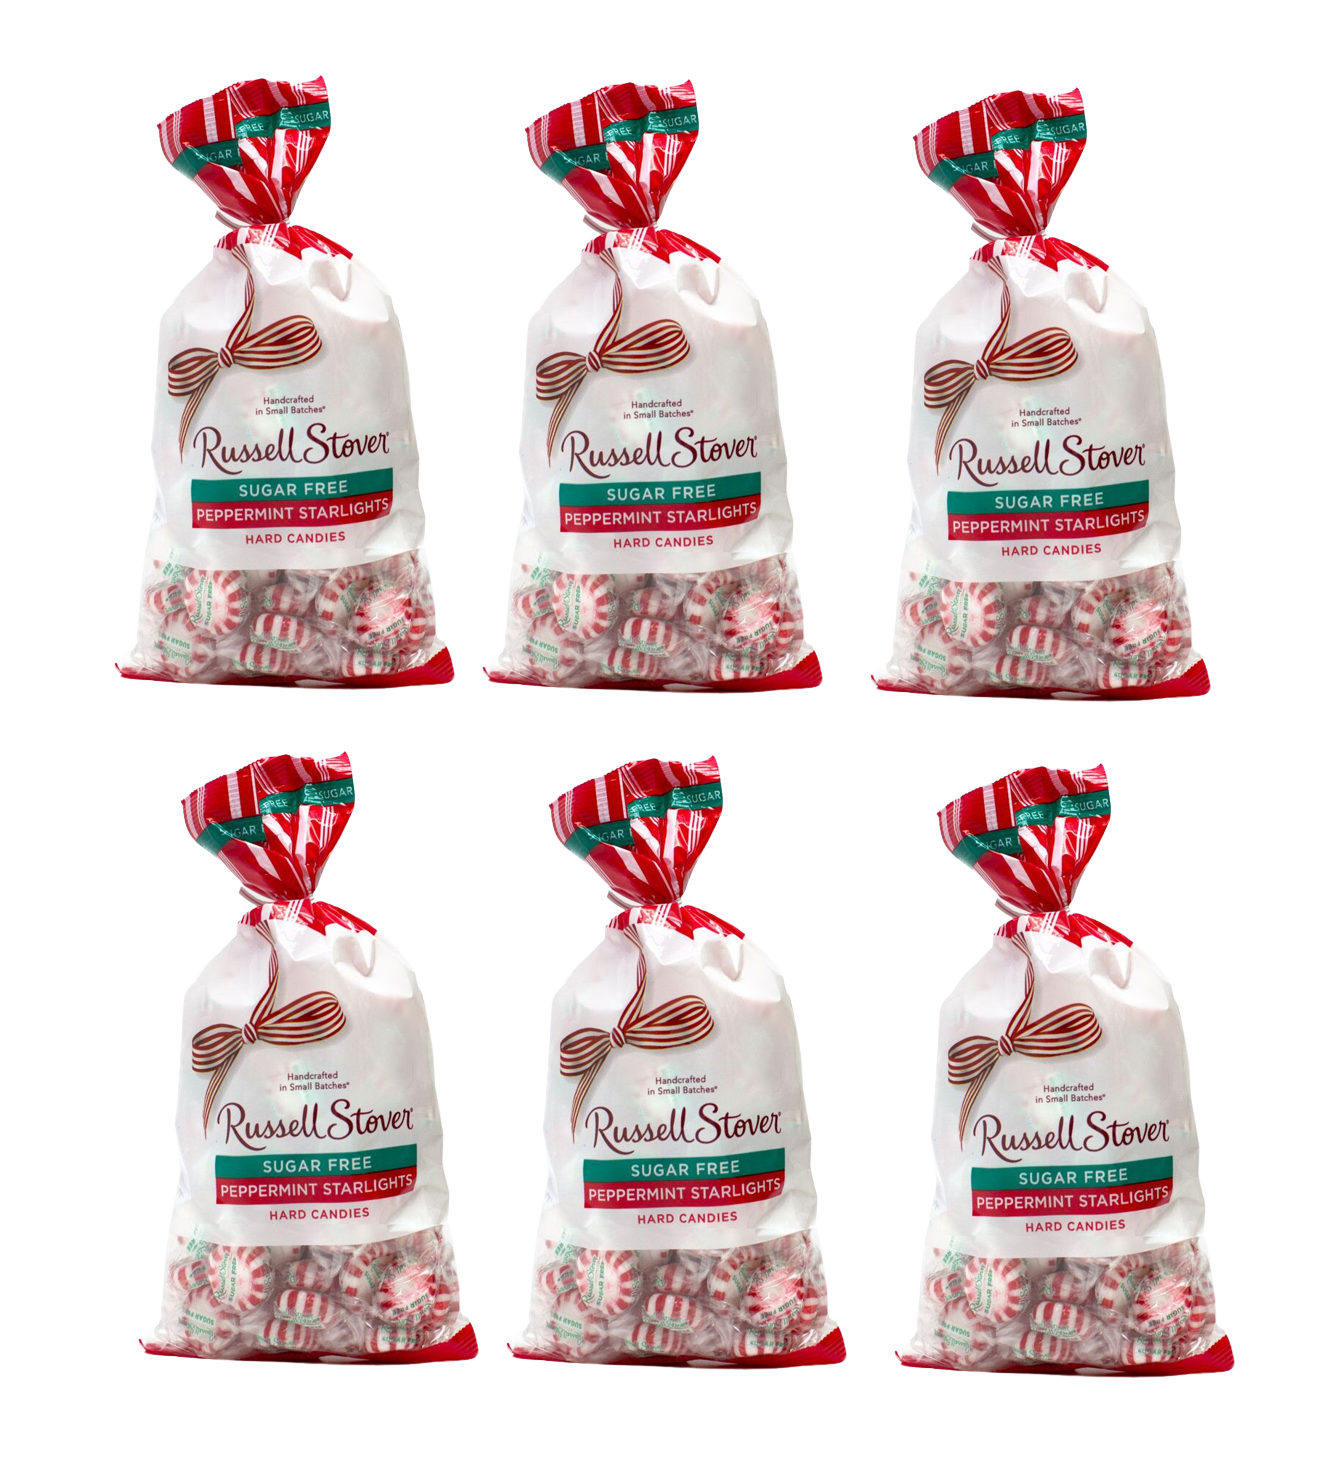 #Flavor_Peppermint Starlights #Size_6 Bags